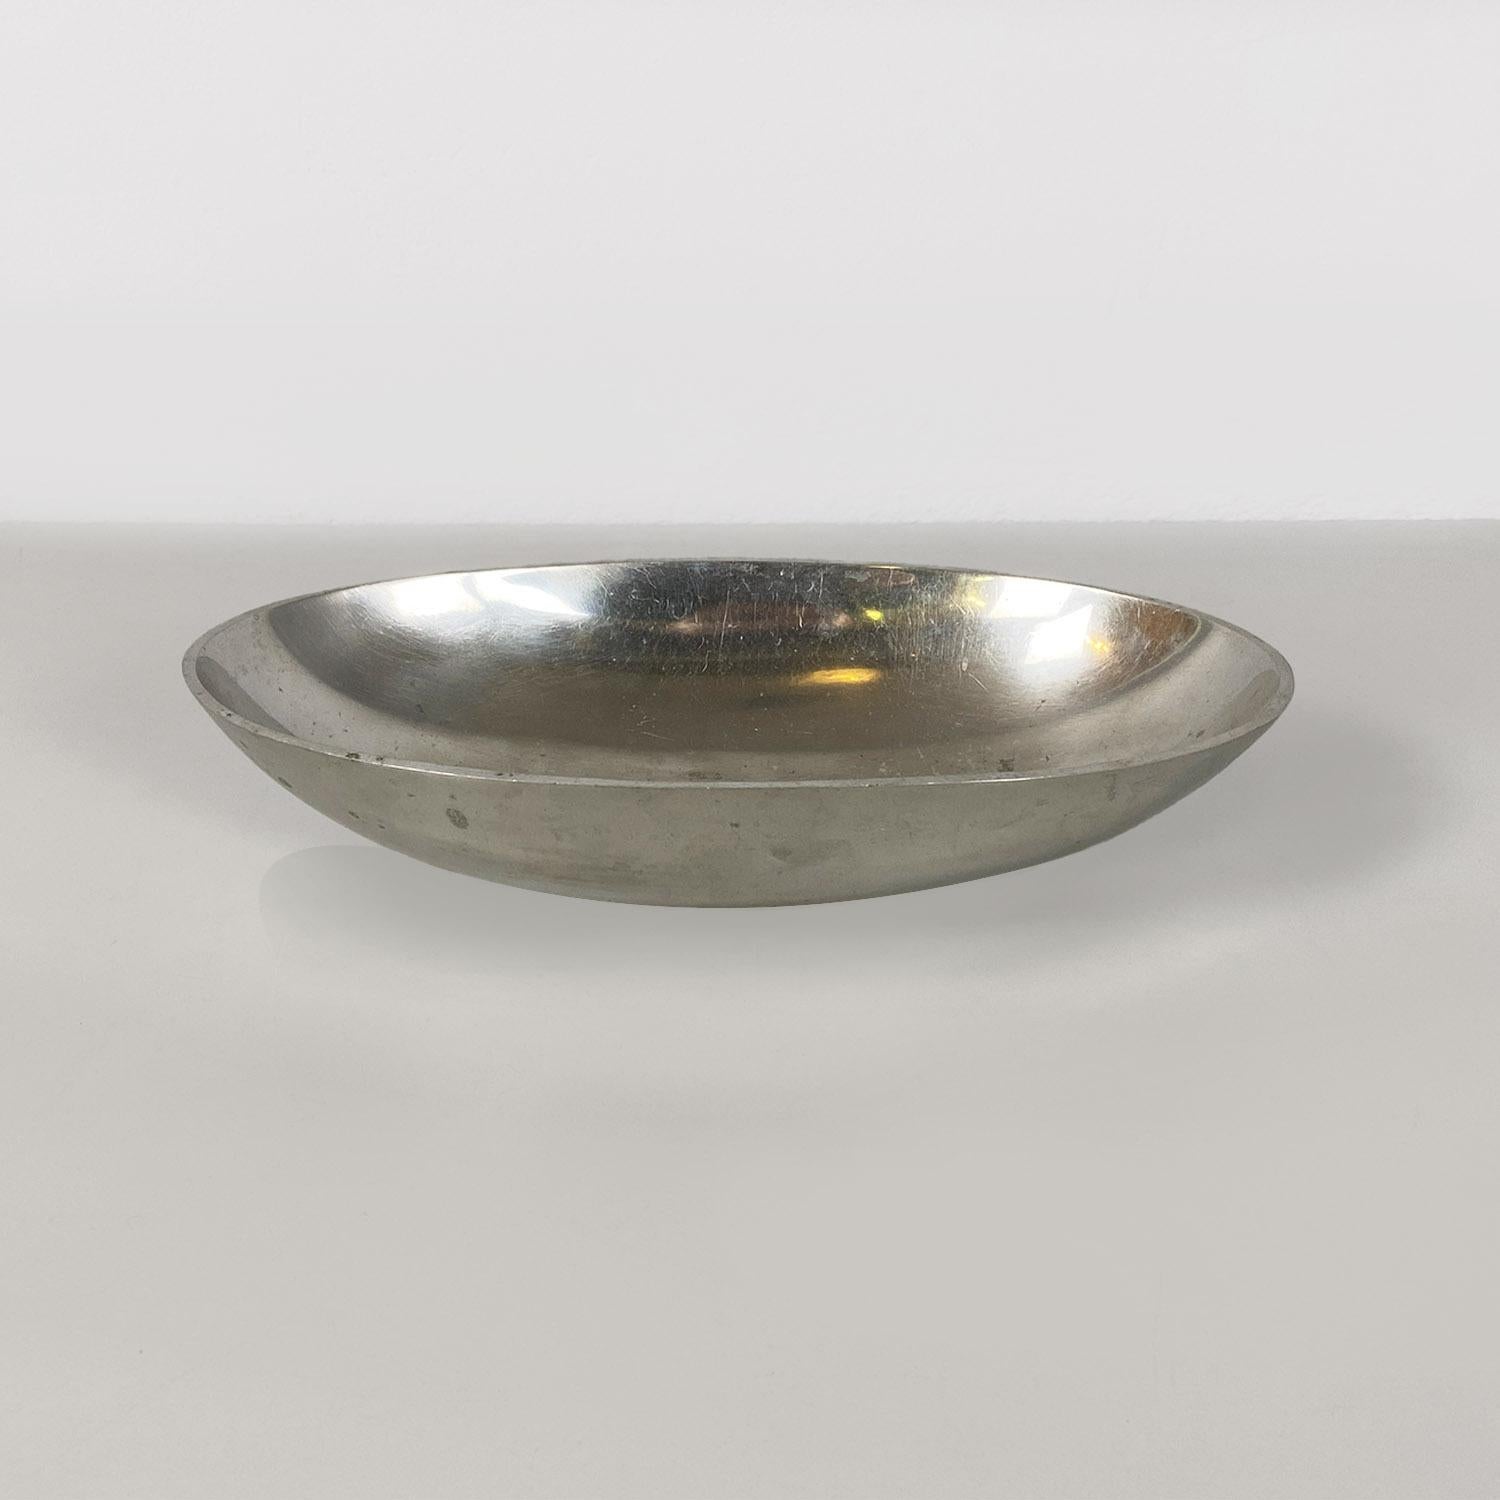 Modern Italian modern metal oval serving bowl or container by La Rinascente, 1990s For Sale